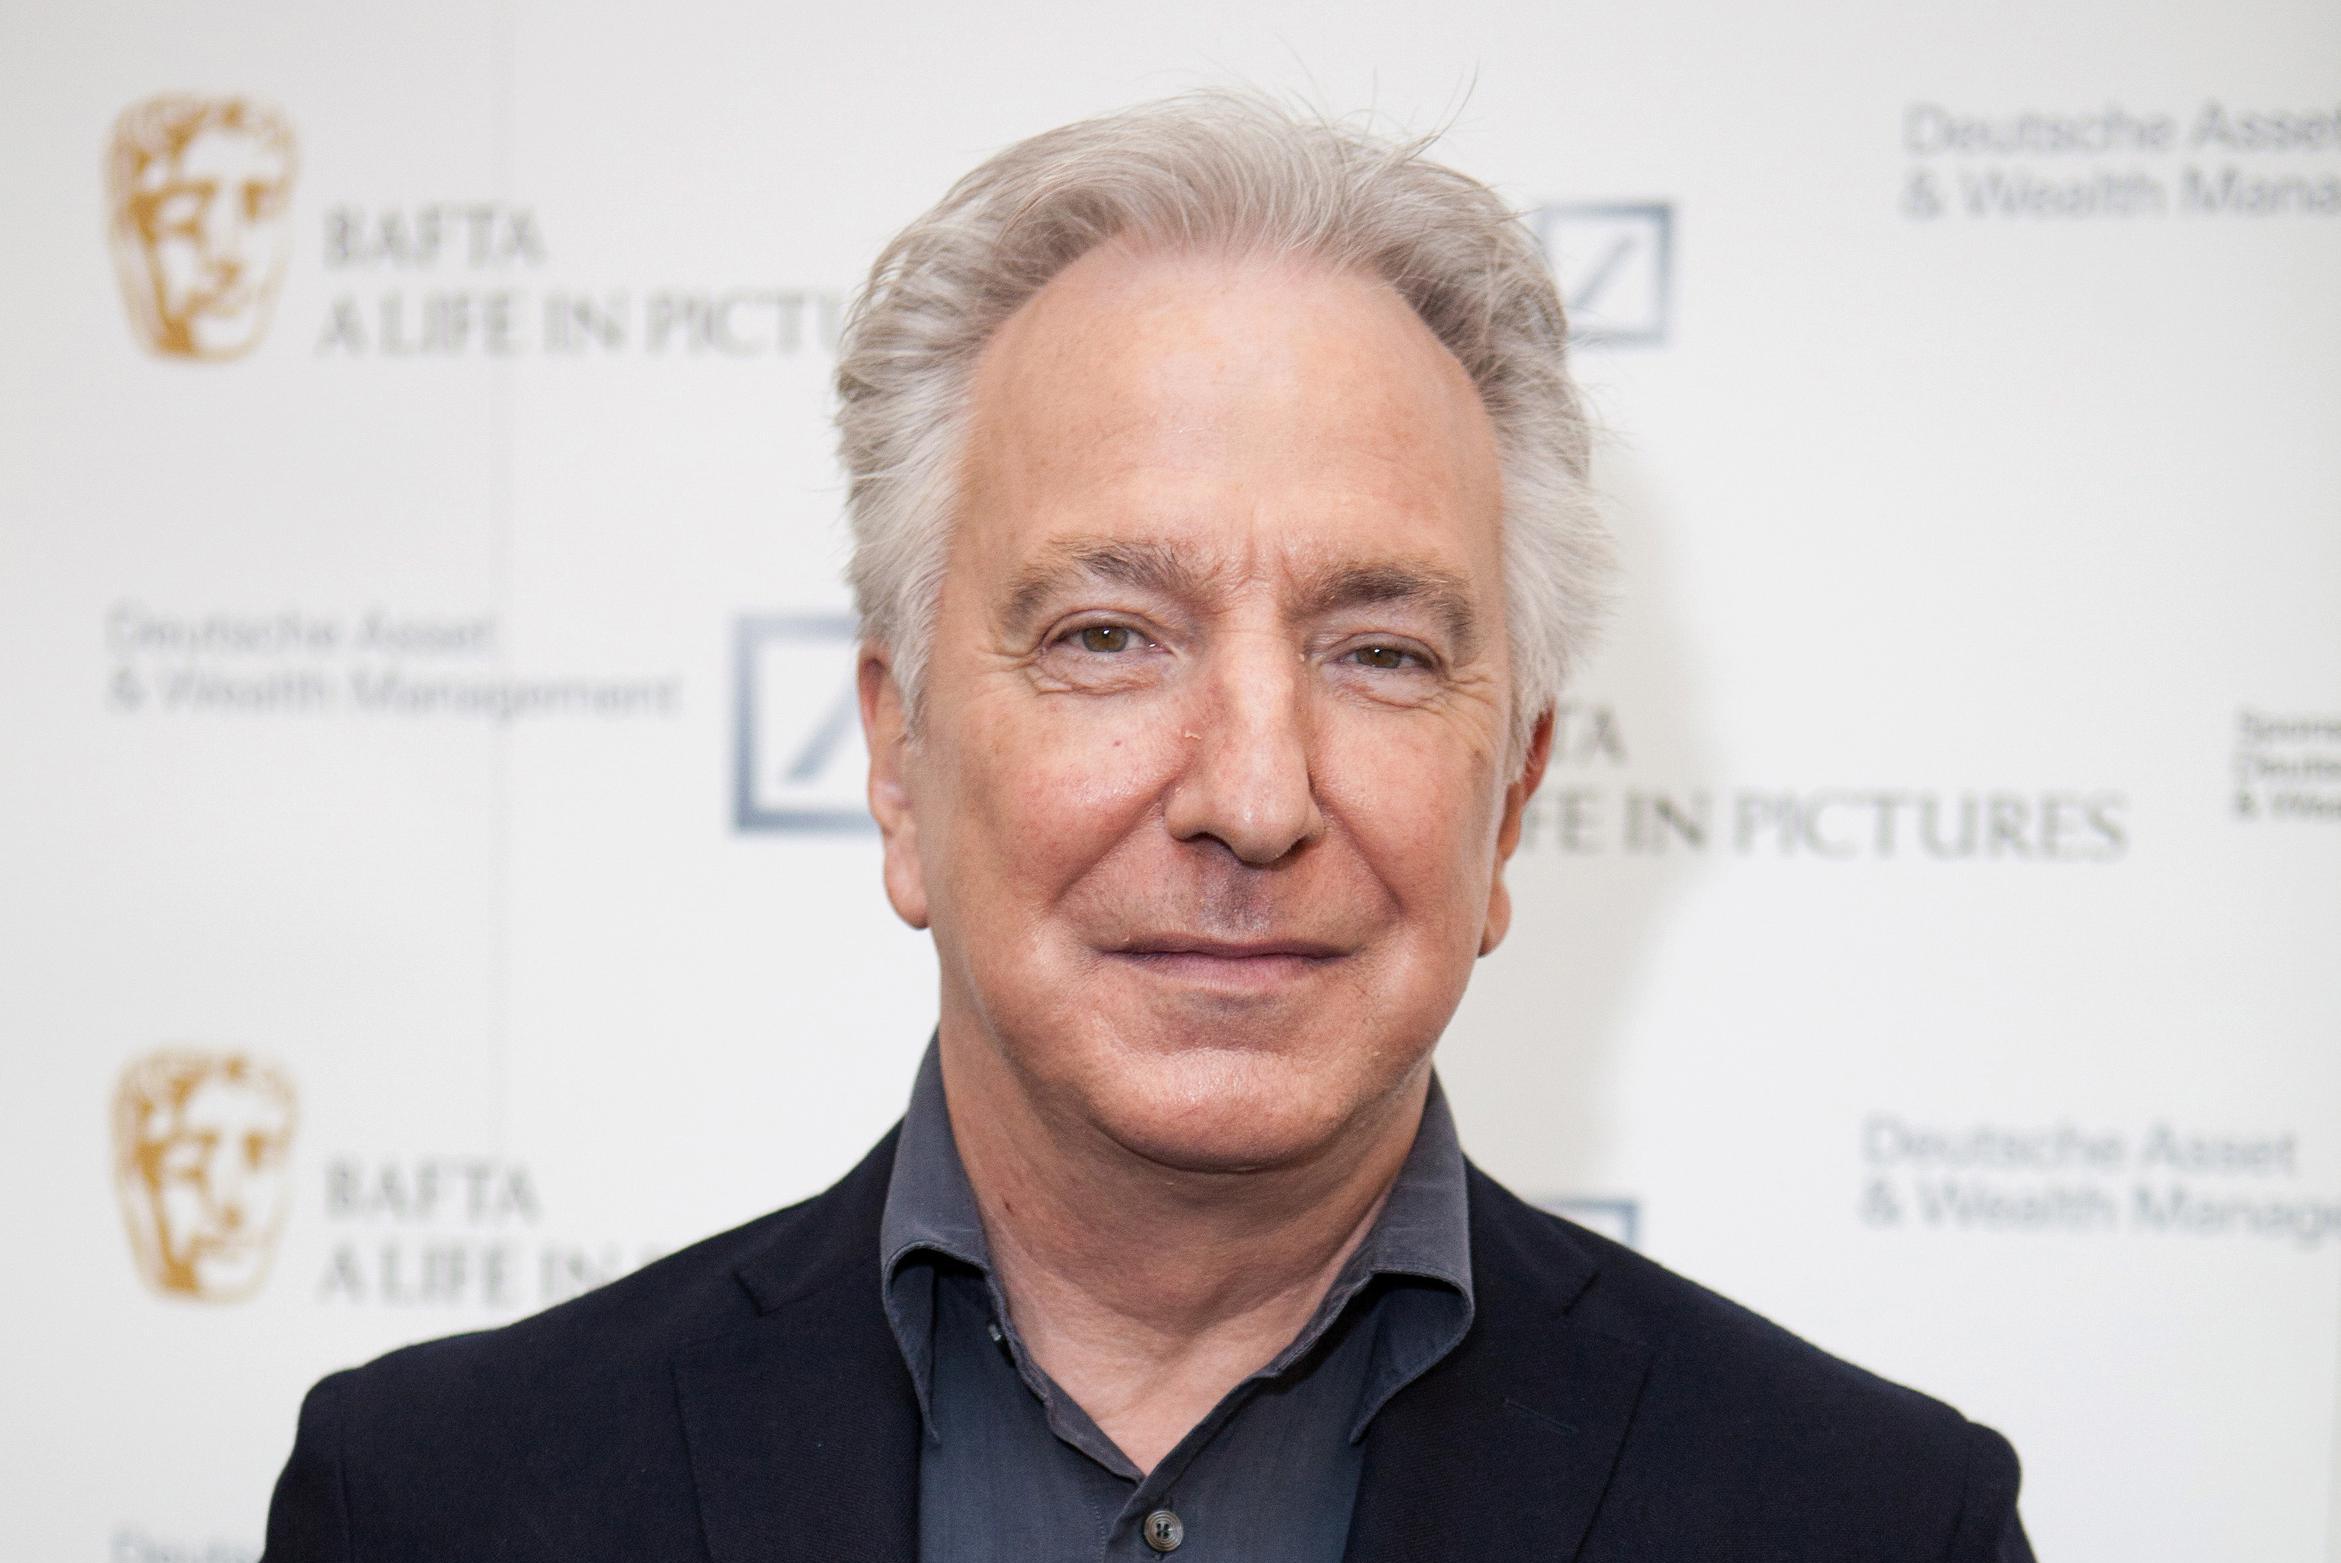 From personal life to what he thought about fellow actors: Diaries of late ‘Harry Potter’ actor Alan Rickman are published